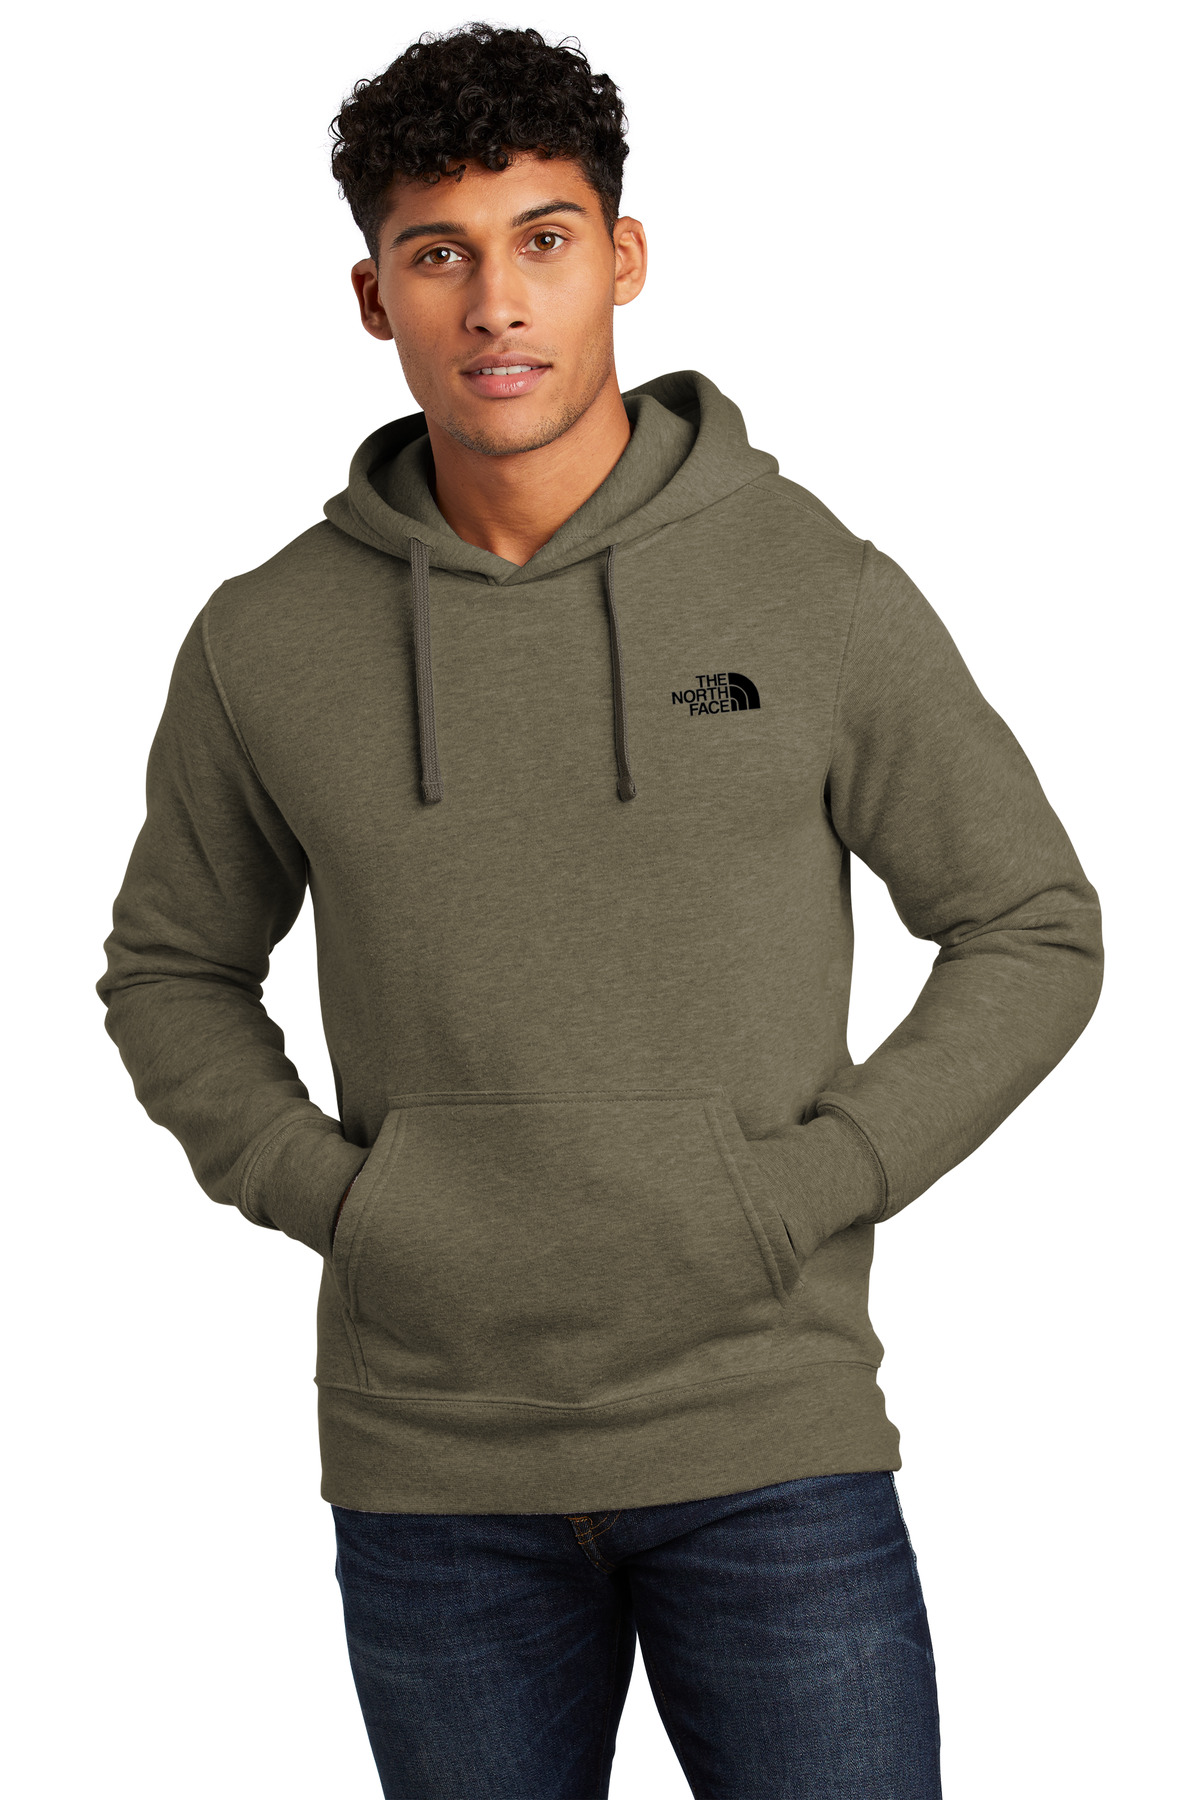 LIMITED EDITION The North Face Chest Logo Pullover Hoodi-The North Face